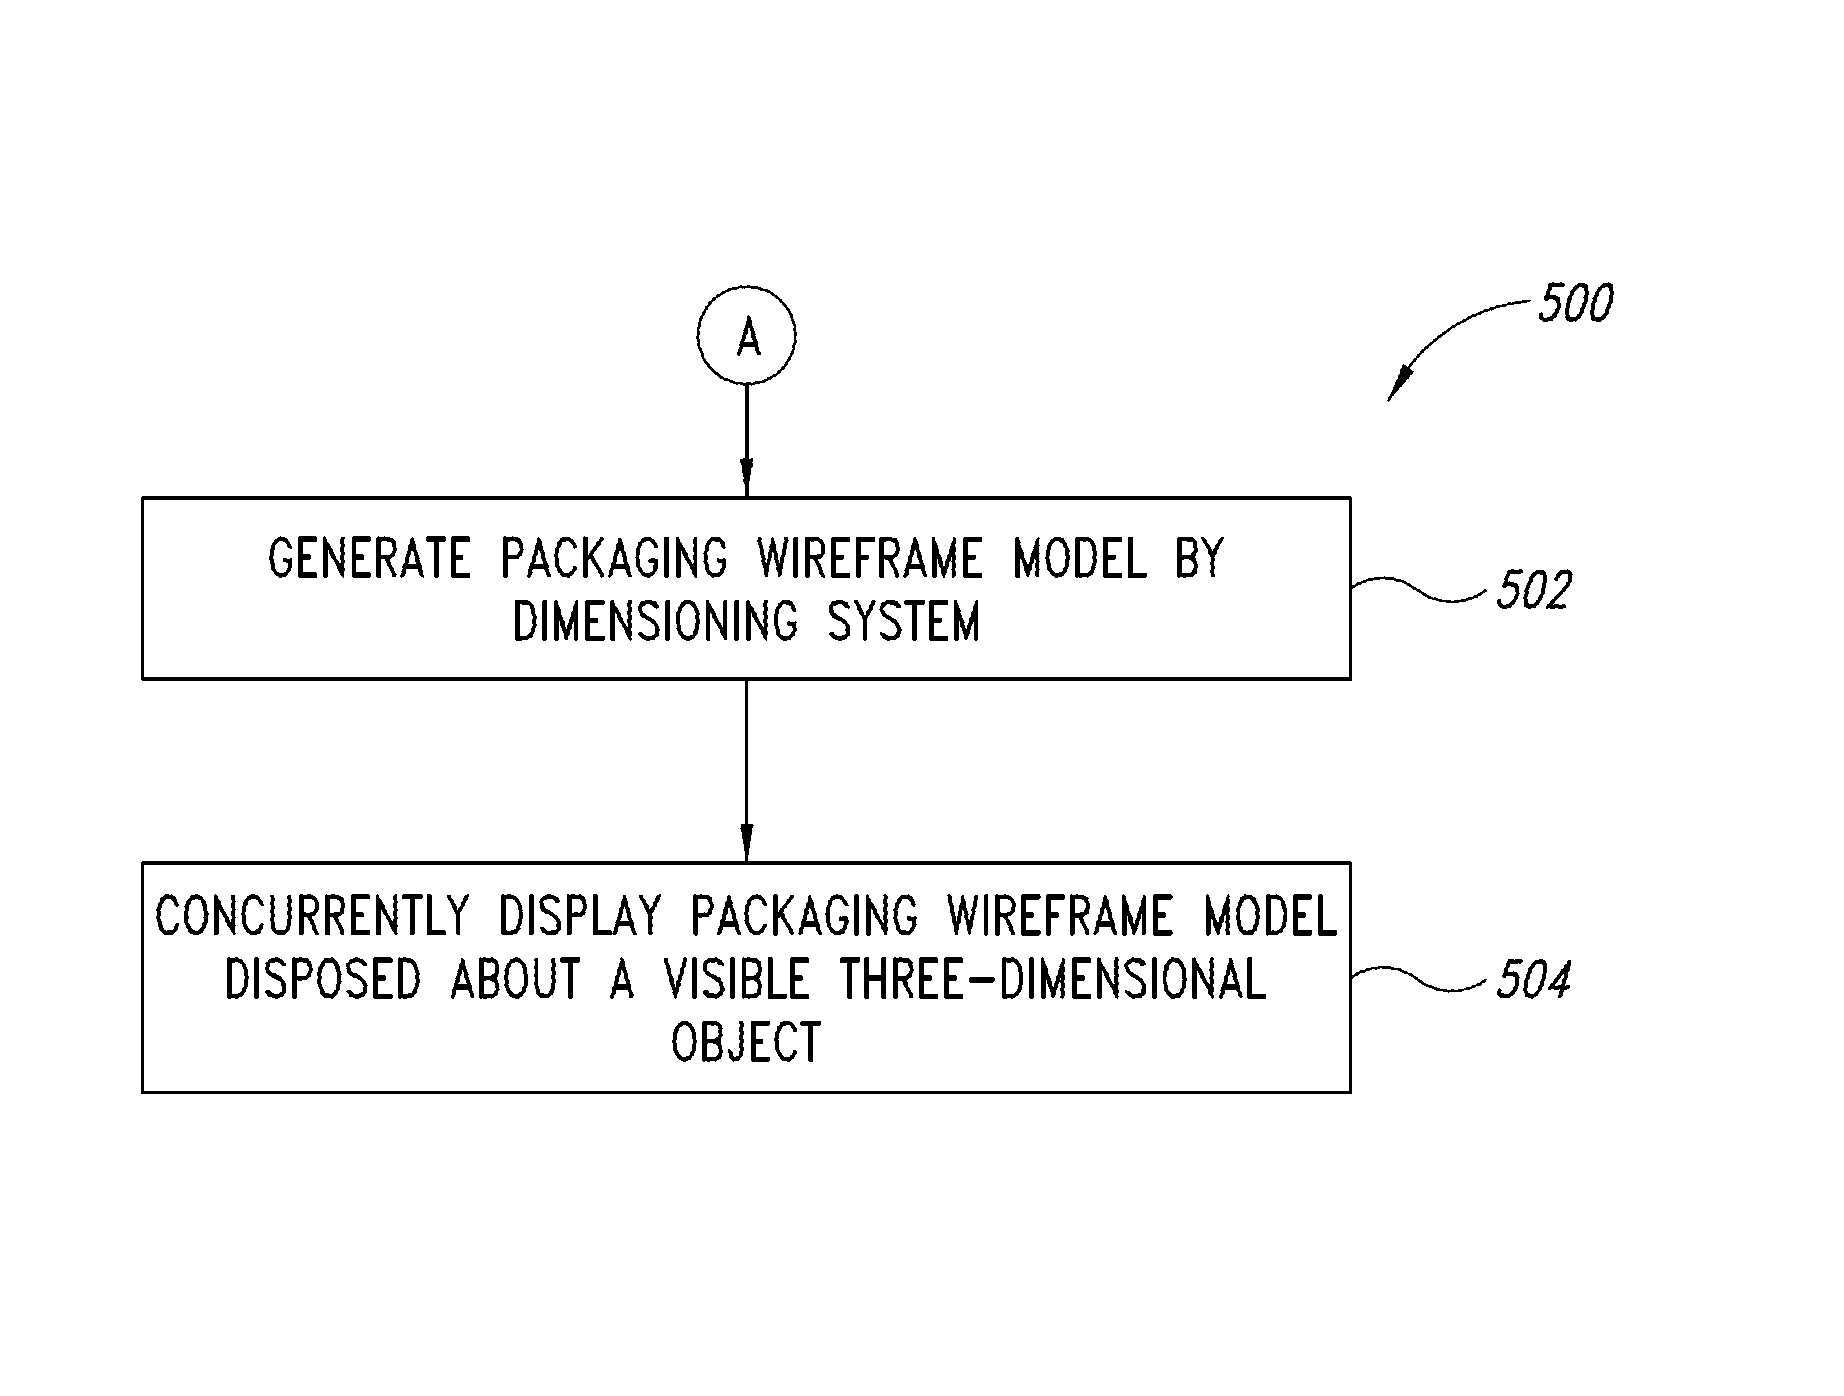 Dimensioning system calibration systems and methods